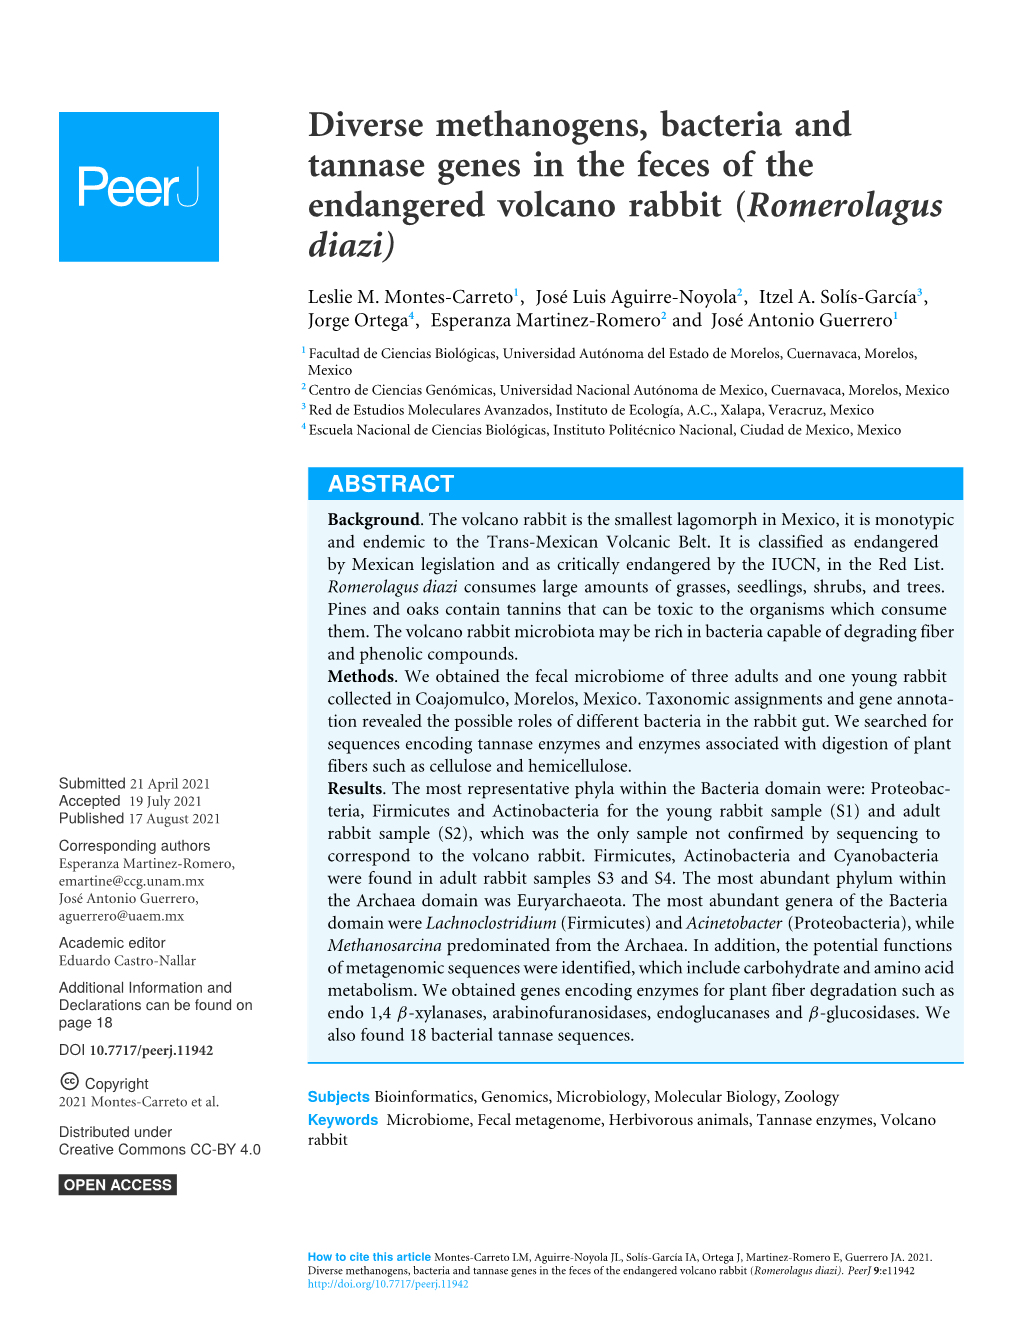 Diverse Methanogens, Bacteria and Tannase Genes in the Feces of the Endangered Volcano Rabbit (Romerolagus Diazi)